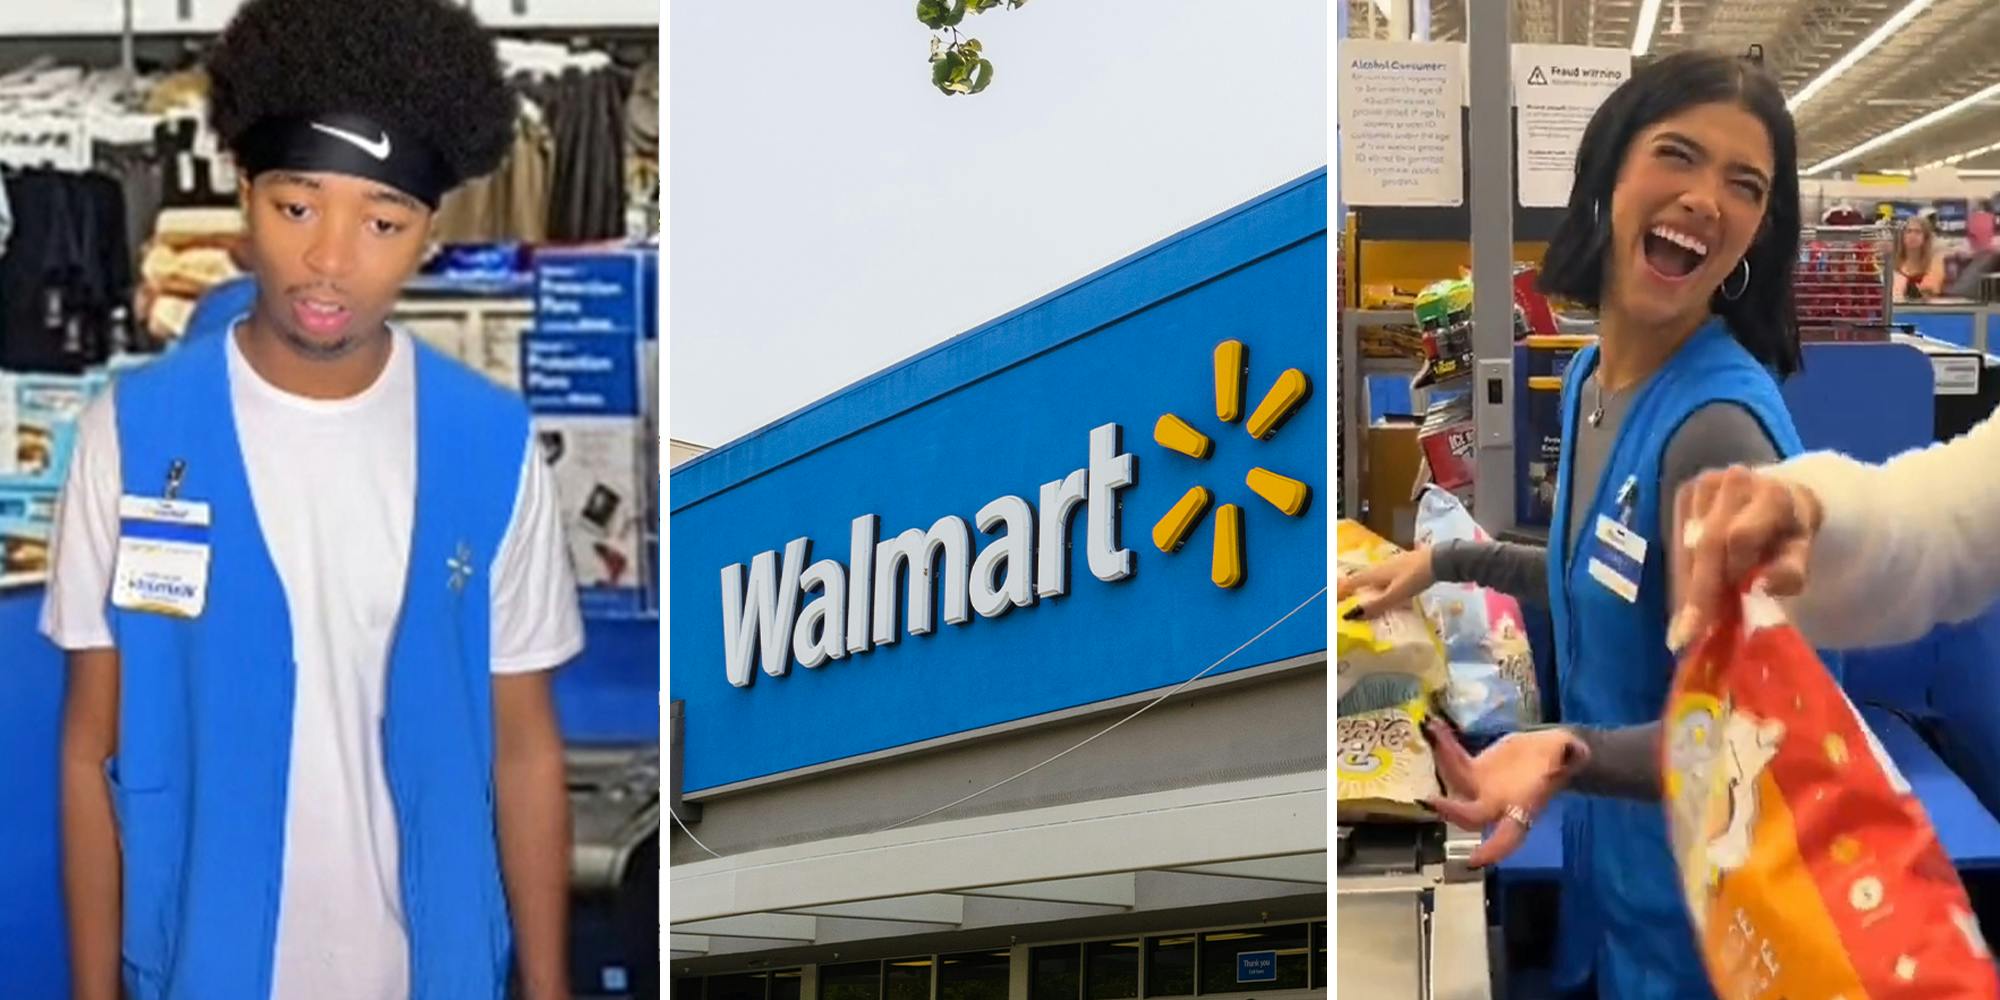 Walmart Worker Calls Out Influencer for Working There ‘for Fun’